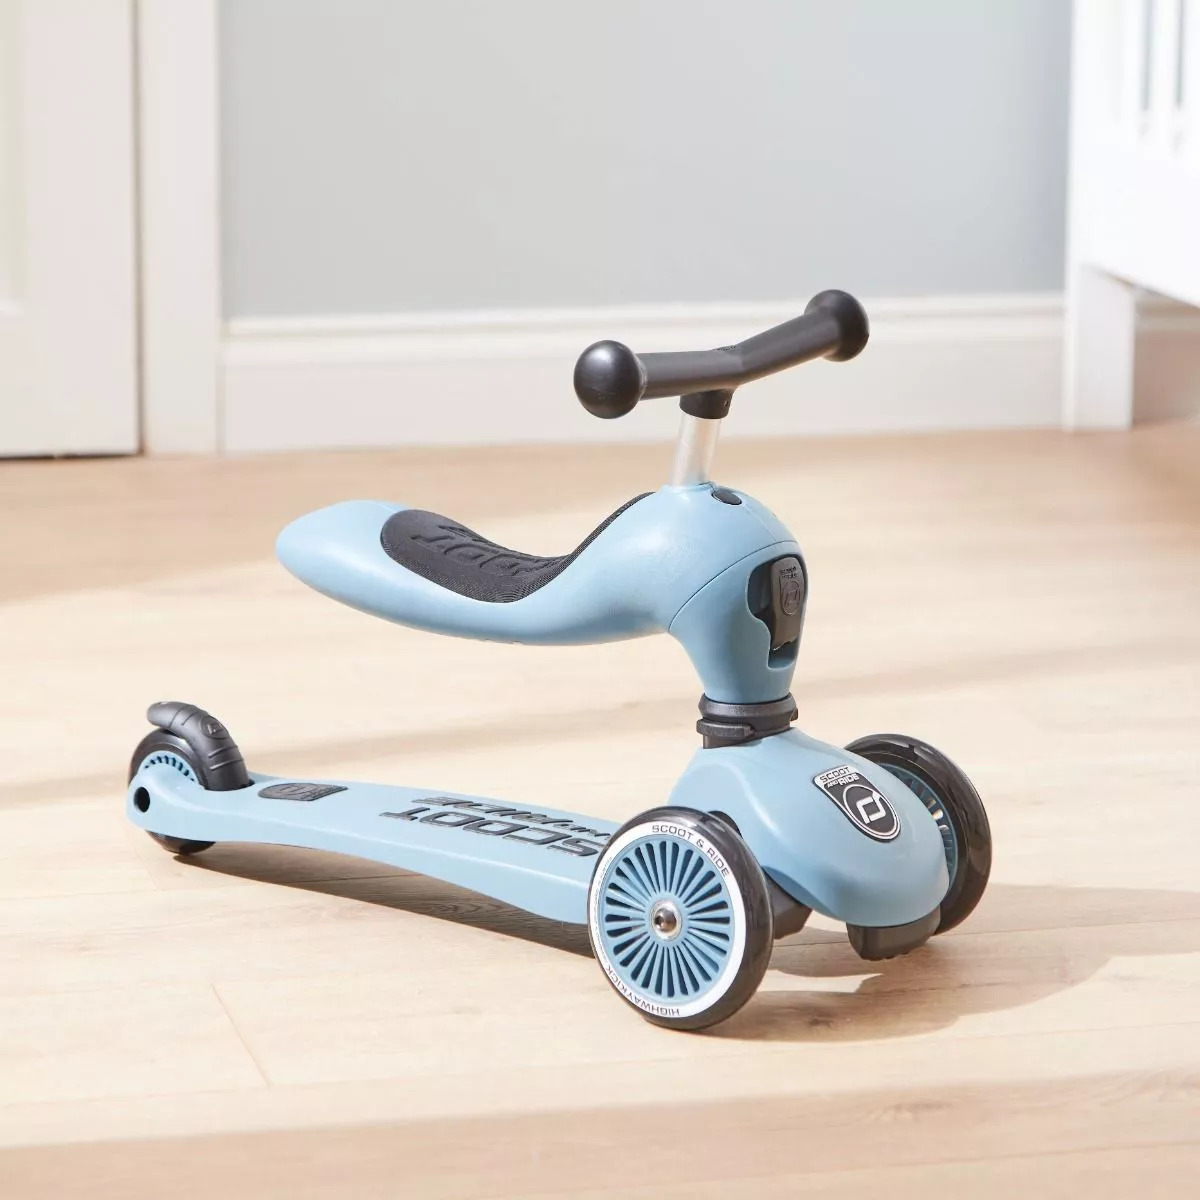 Kick Ride, Scoot & Ride Toddler Scooter in Steel Blue